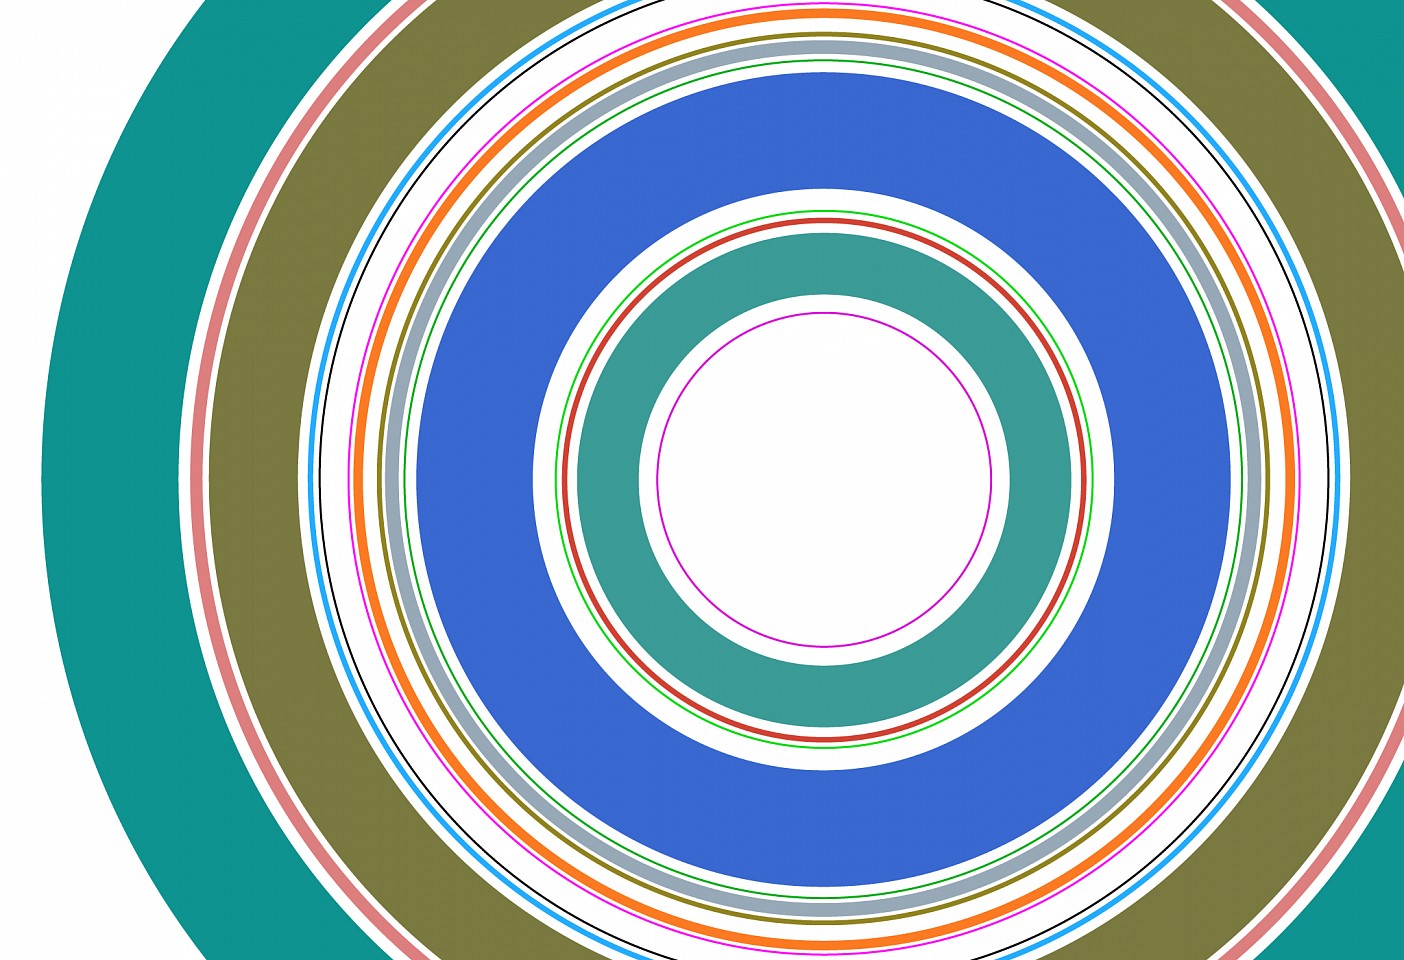 Dane Albert, Circles #43 Day, 2023
Acrylic on canvas (Concept), 48 x 72 in. (121.9 x 182.9 cm)
Series of colored lines and shapes in multiple configurations
DA.2023-043-day